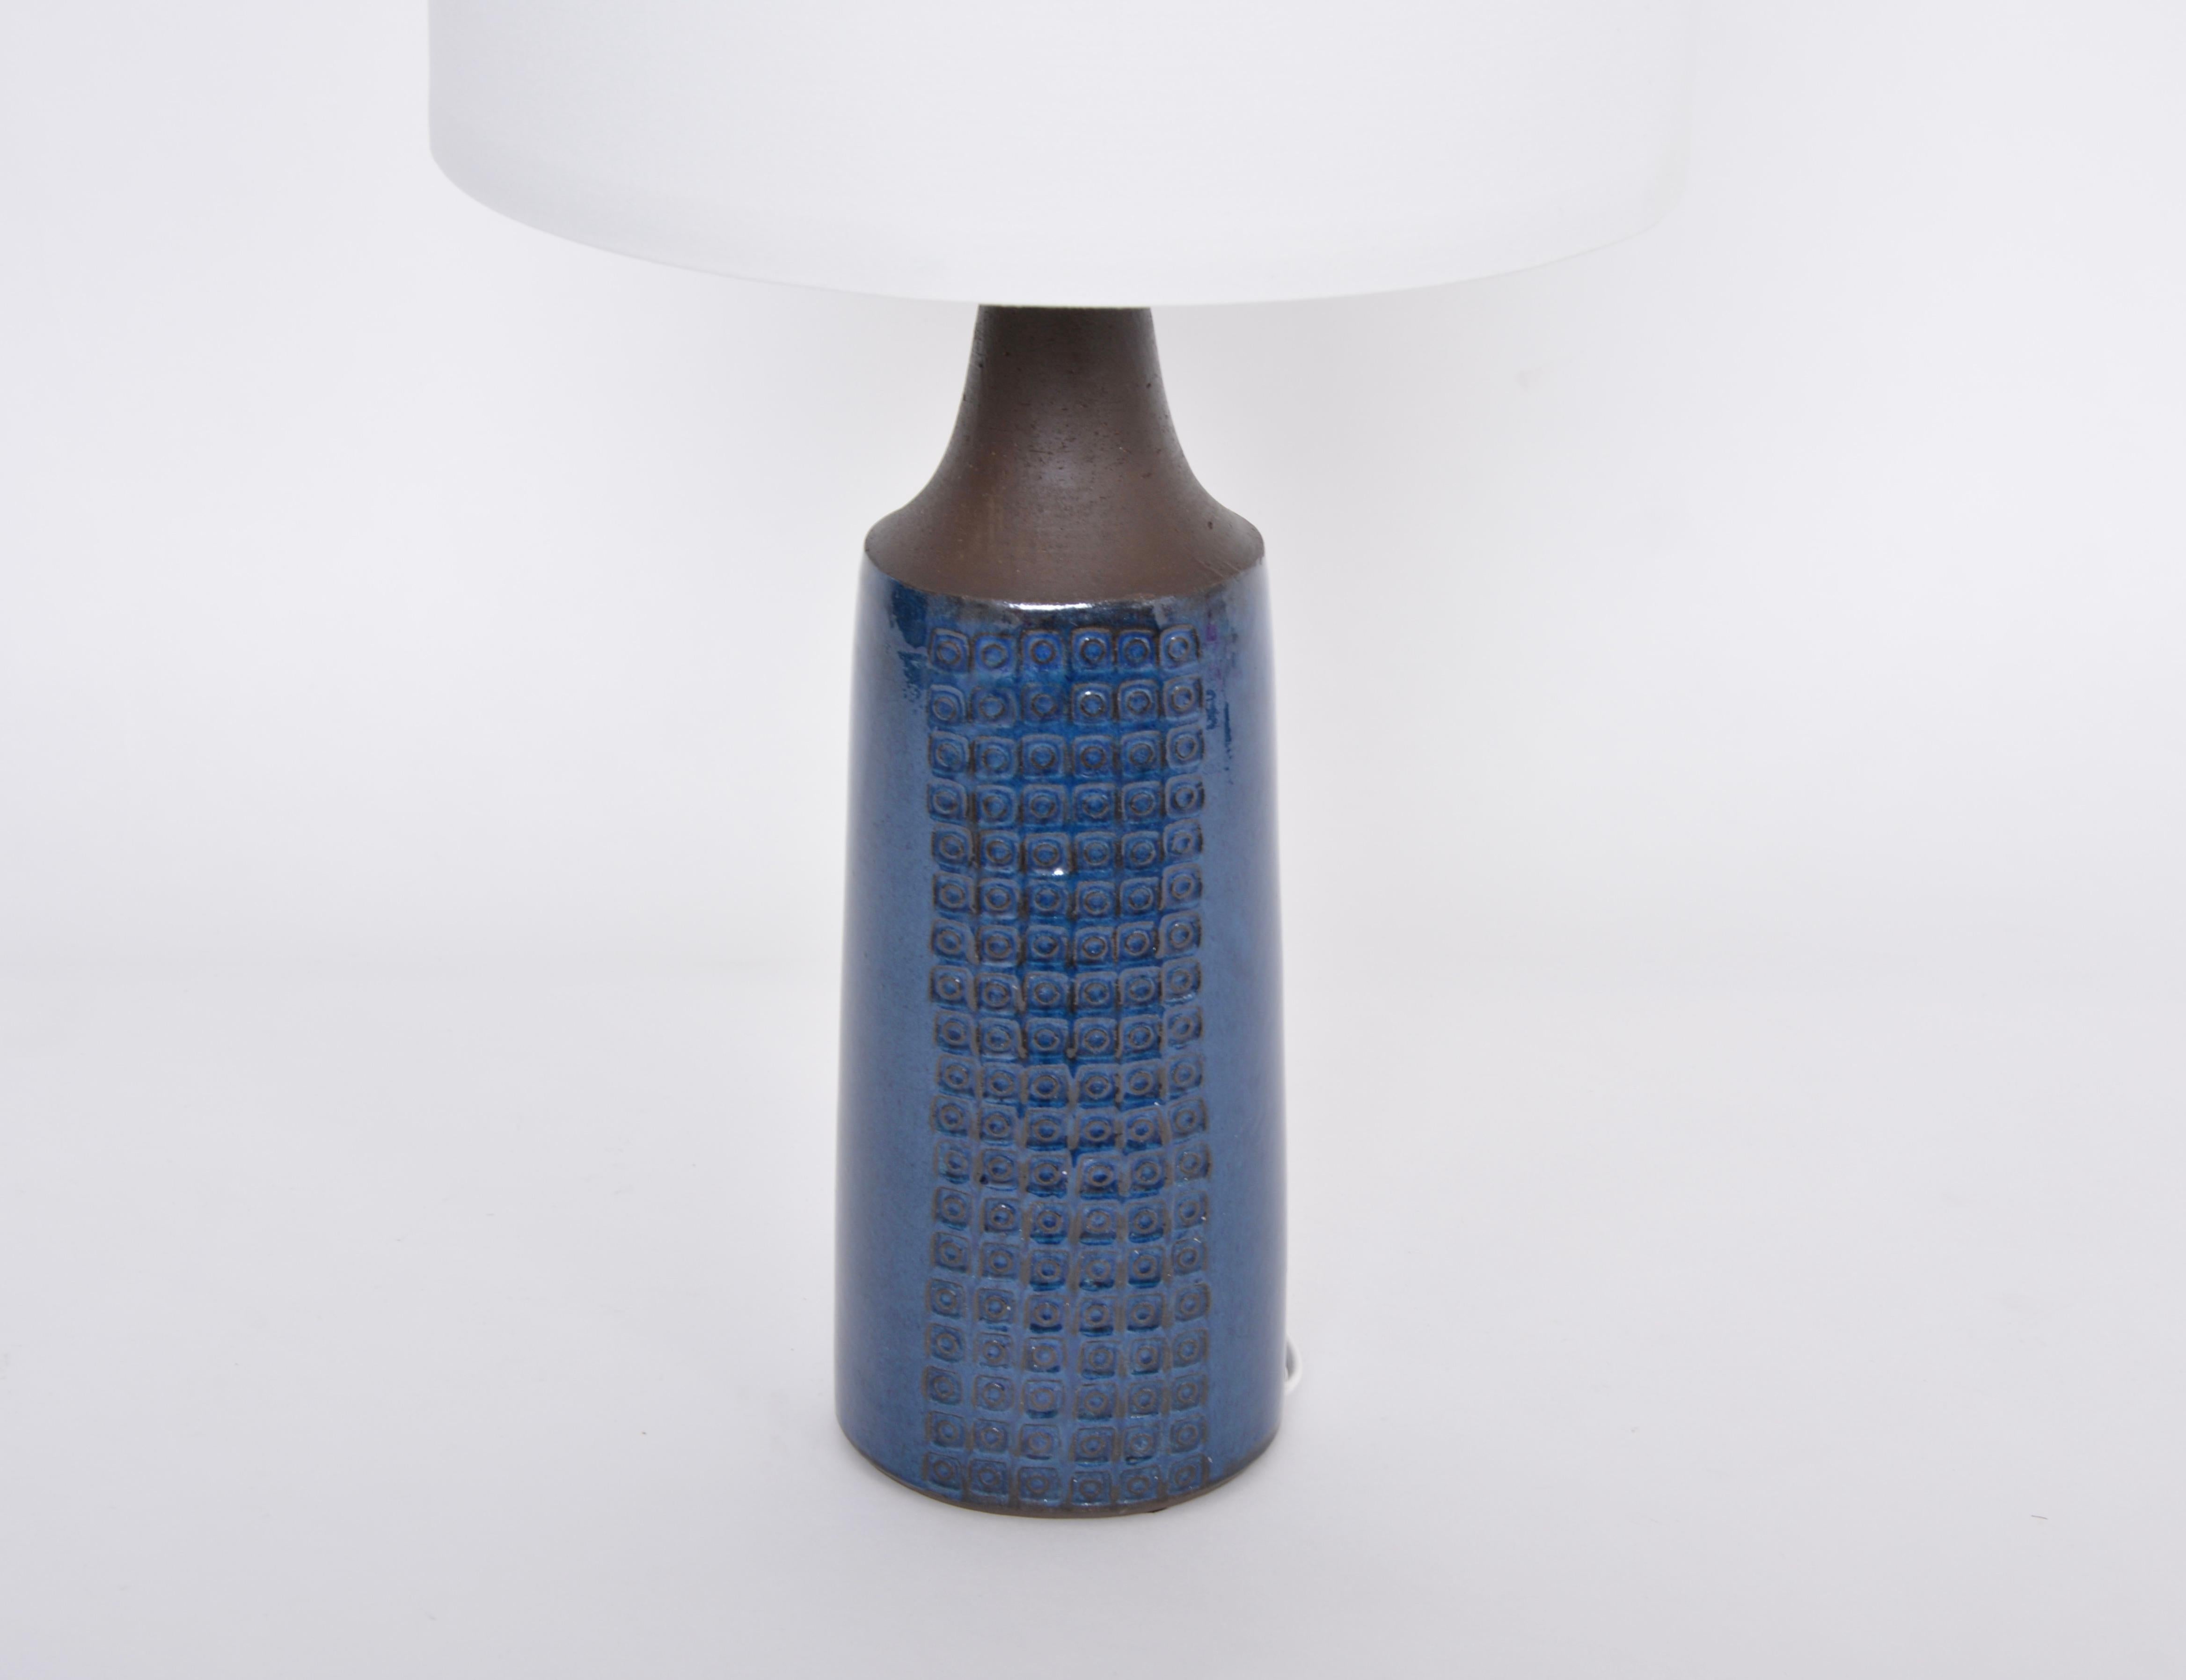 Handmade Danish Mid-Century Modern Ceramic table lamp by Nysted Keramik
This tall table lamp was manufactured in the small Danish city of Nysted in the 1970s. The lamp's base is made of stoneware and was glazed with beautiful deep blue colored